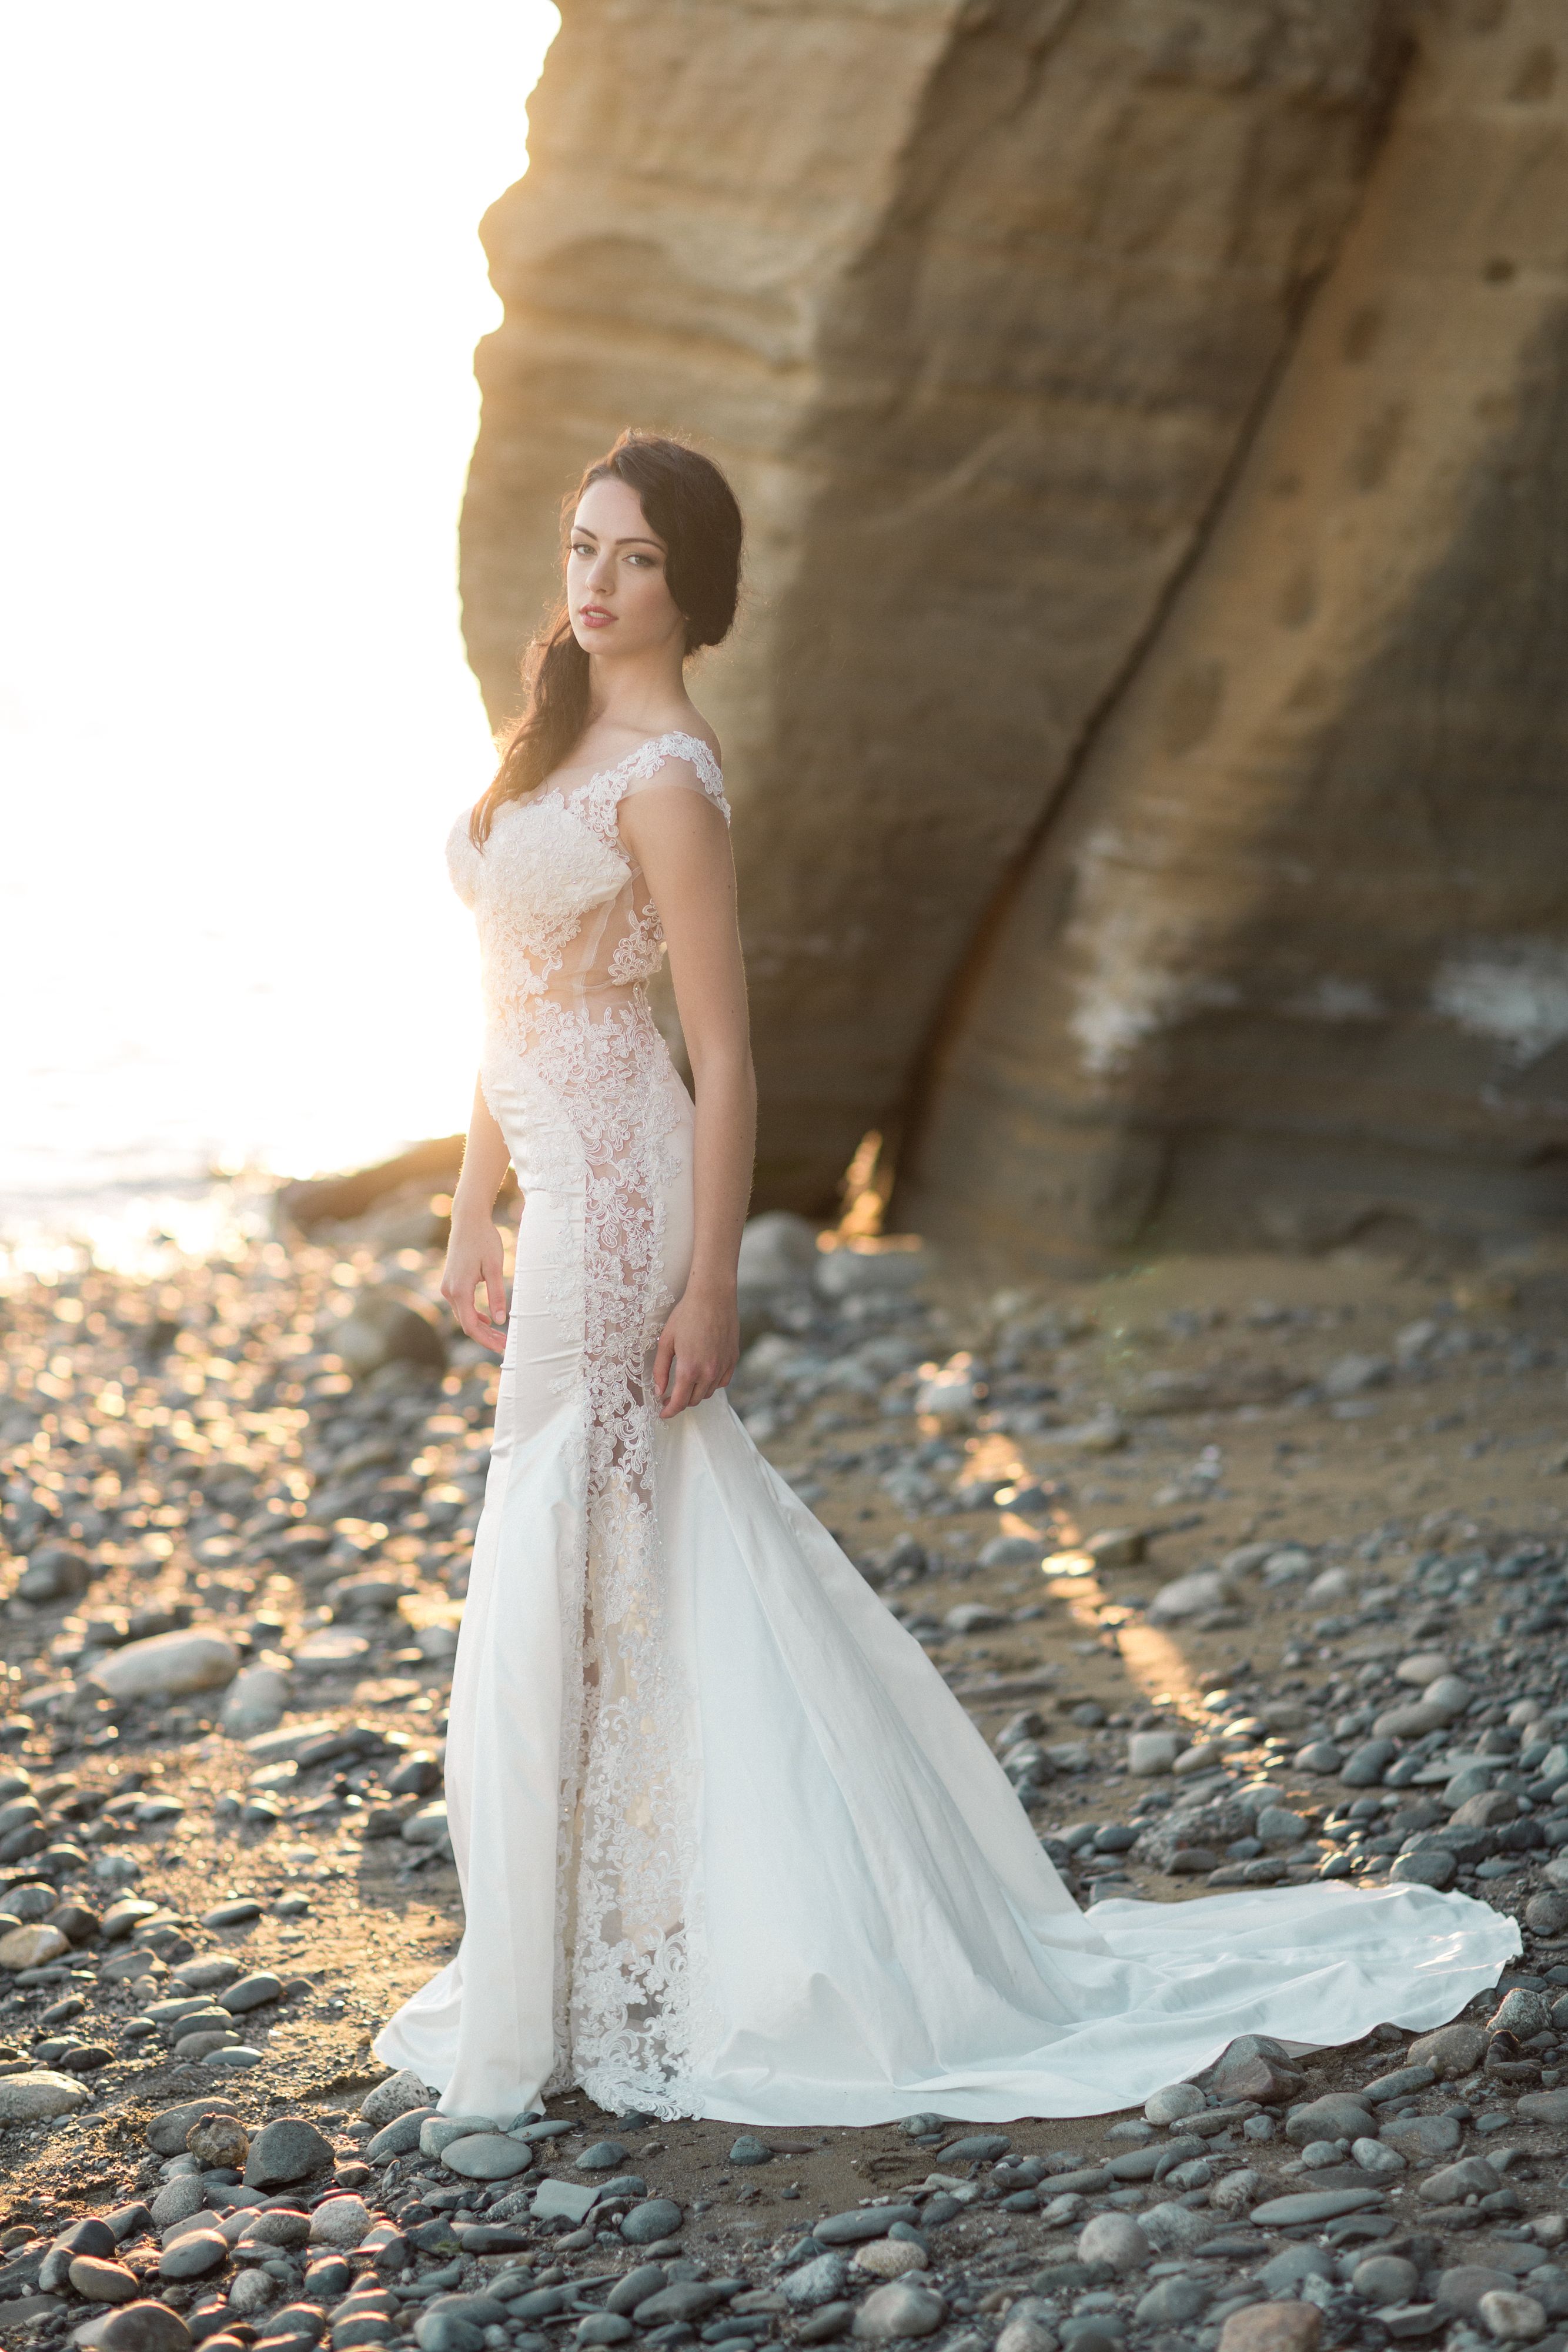 Buy Hand Crafted Sheath Lace Wedding Dress Style Ss16314 Made To Order From Dream Dresses By 